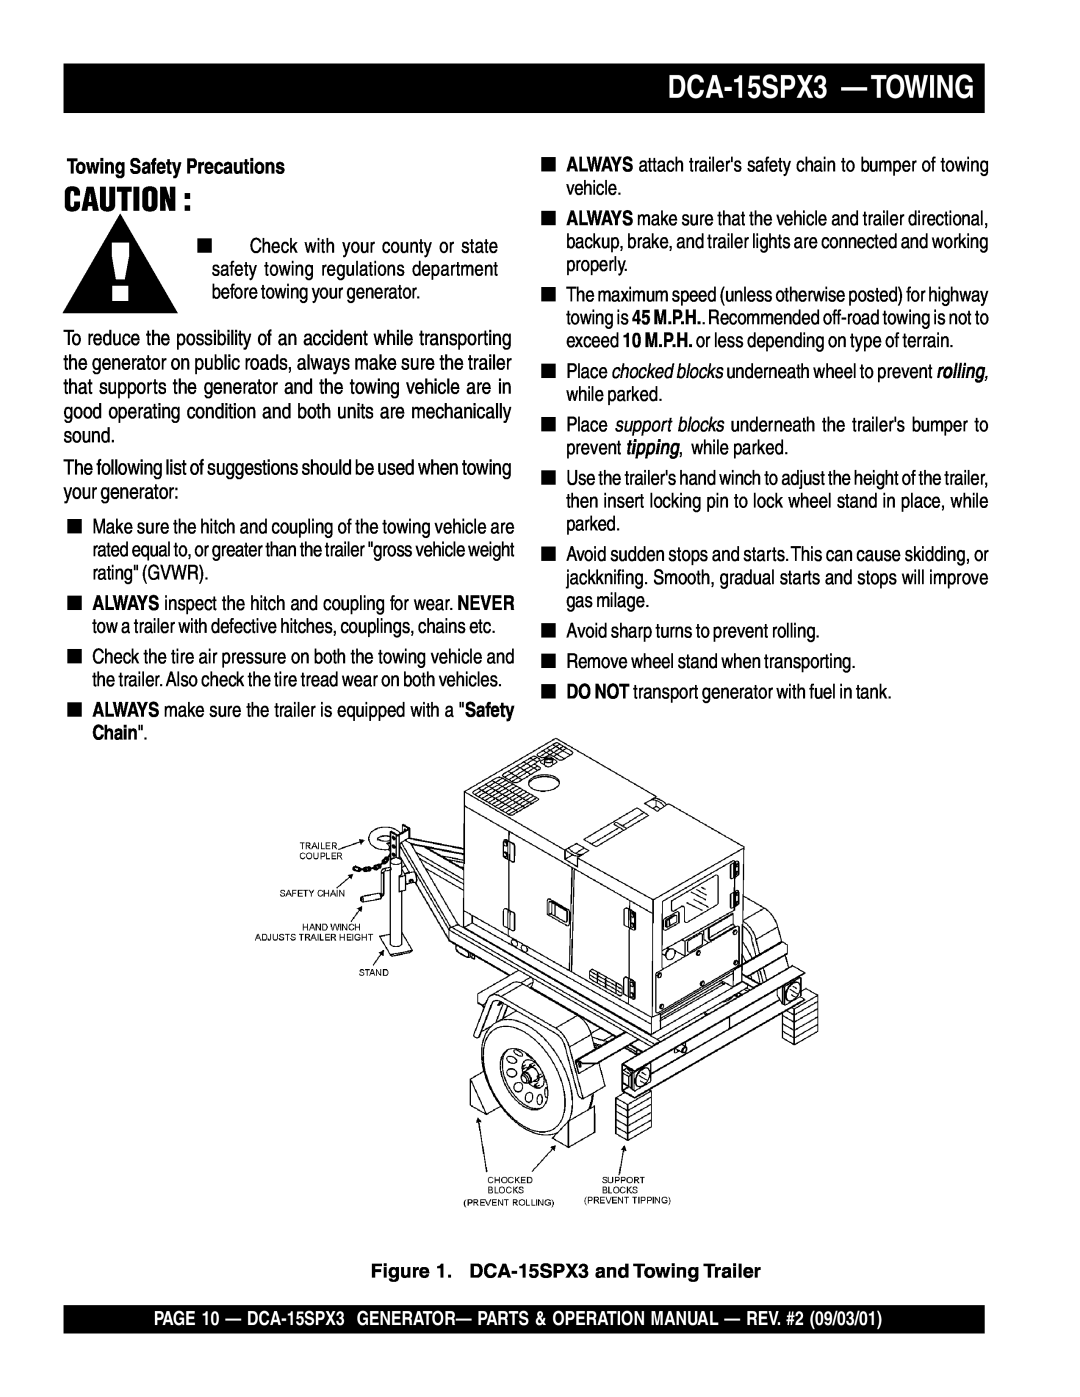 Multiquip operation manual DCA-15SPX3 —TOWING, Towing Safety Precautions, DCA-15SPX3and Towing Trailer 